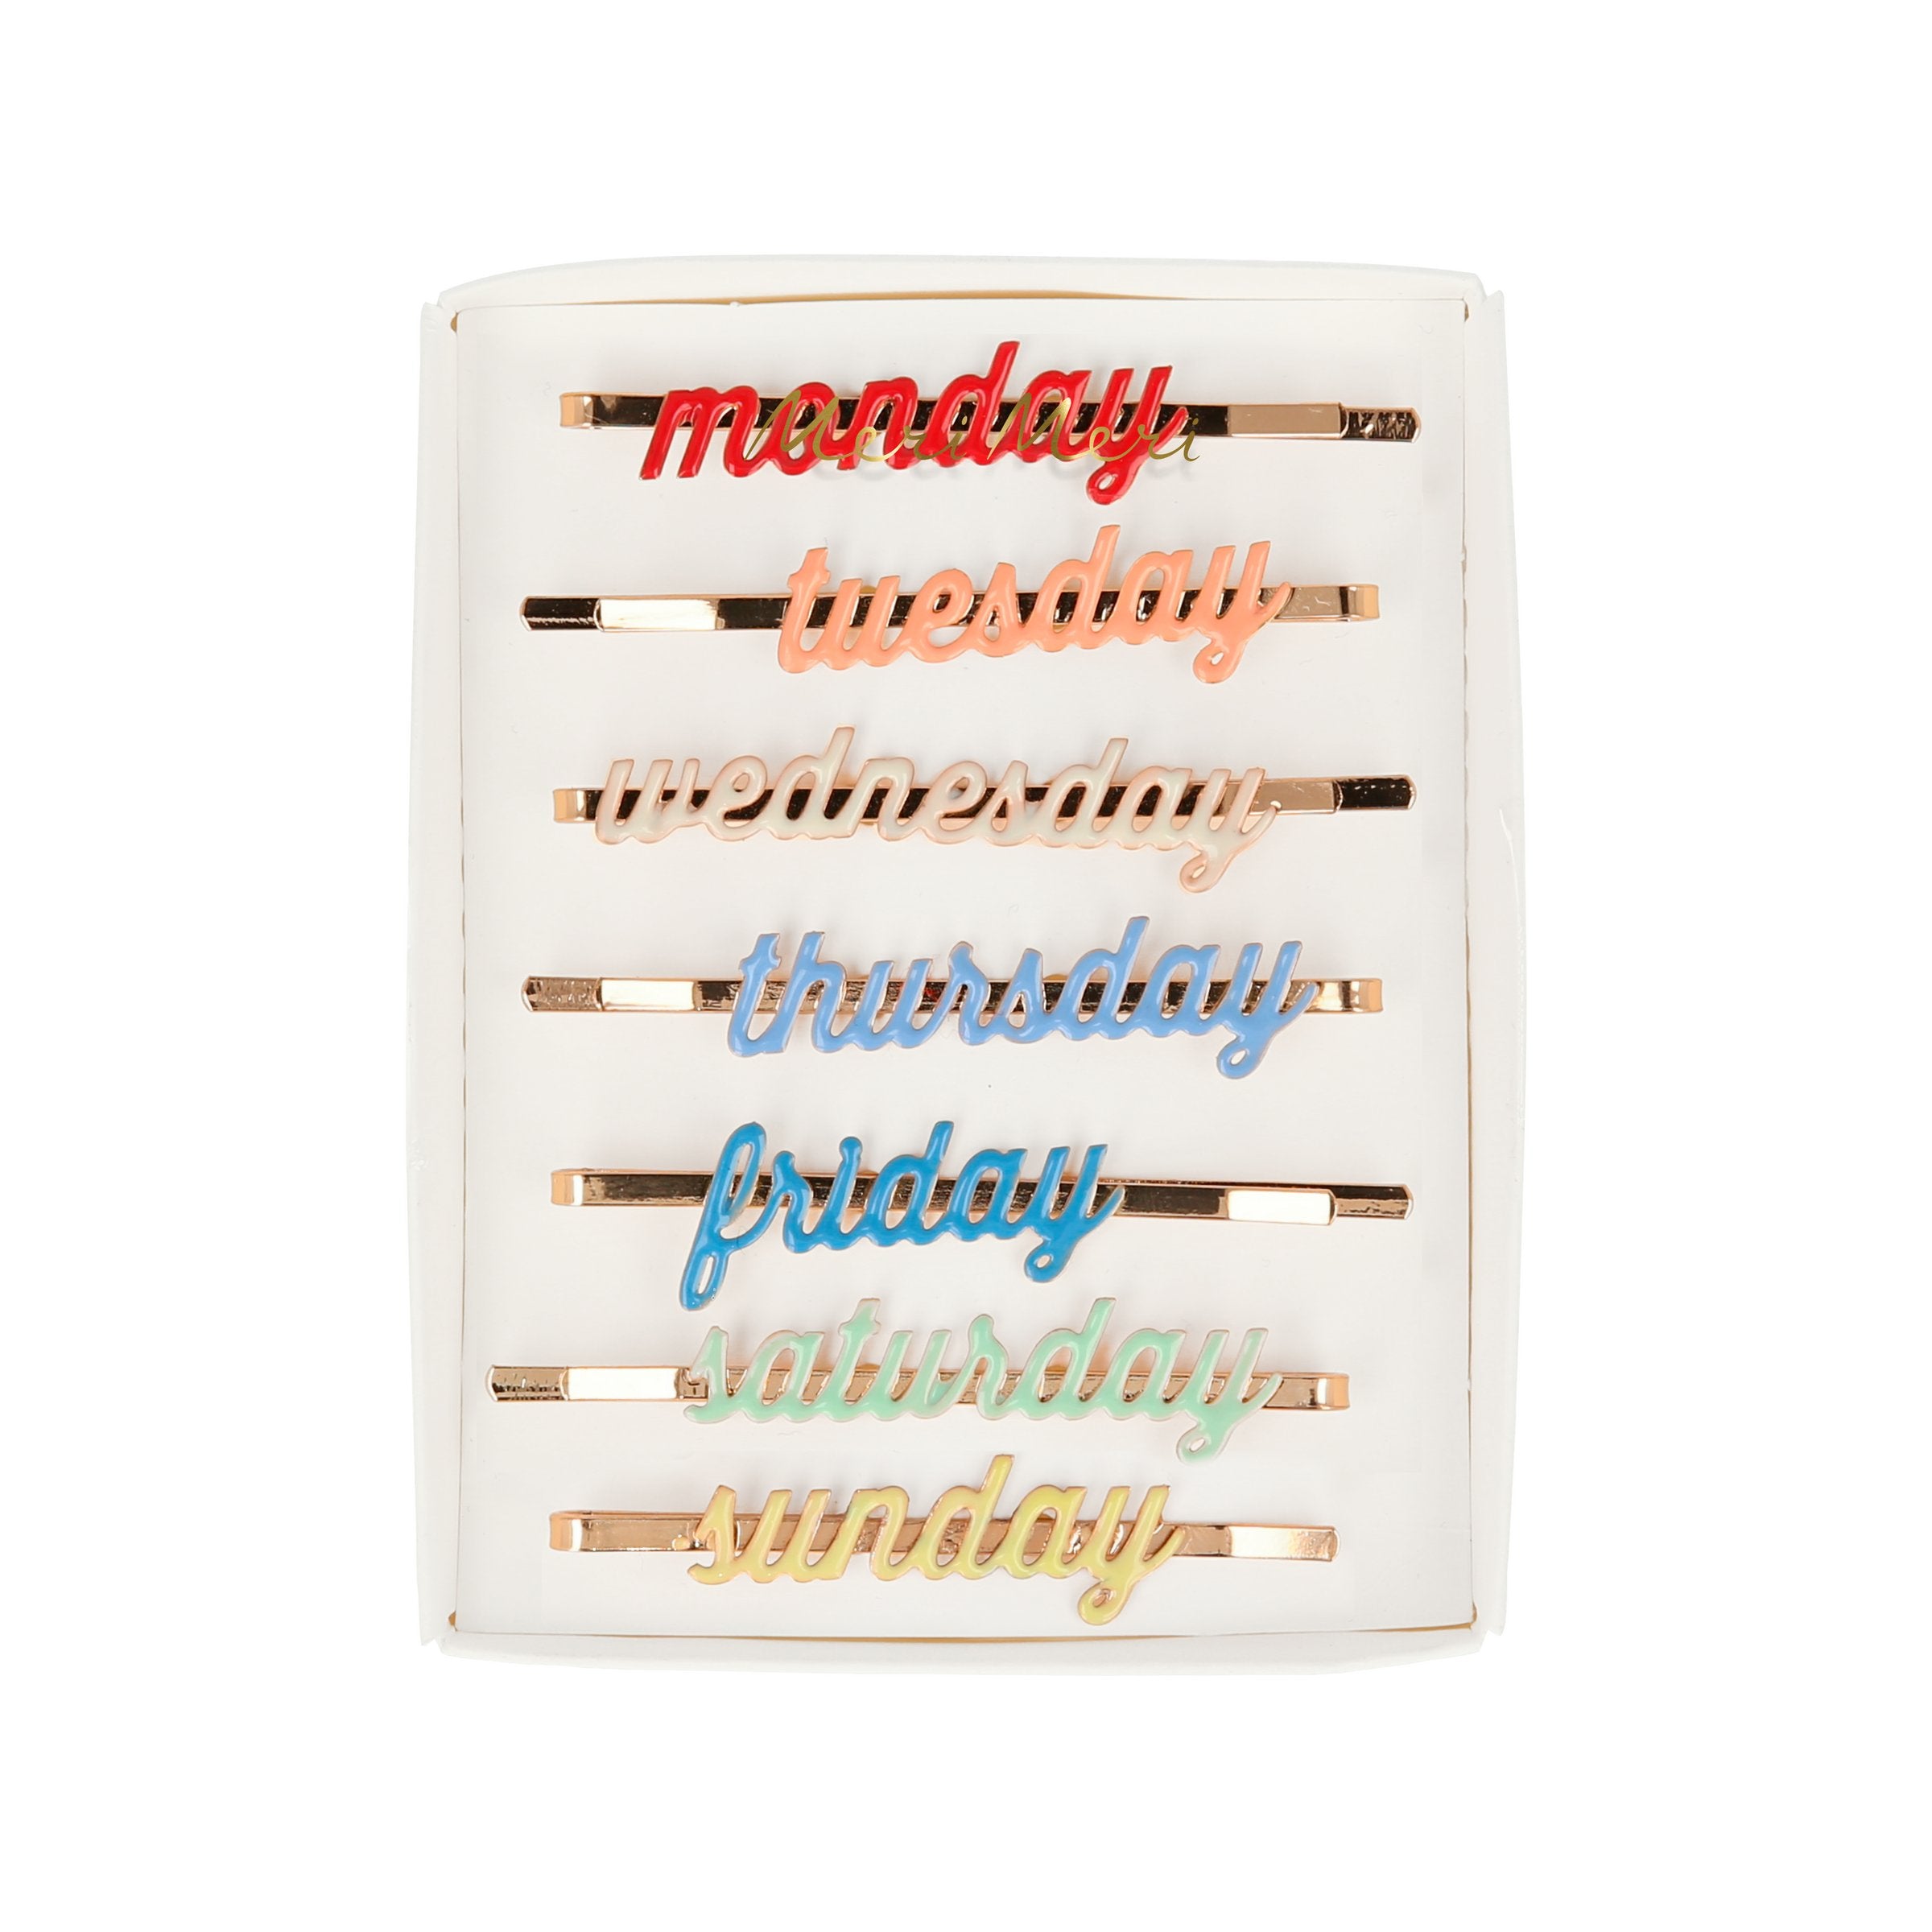 Our days of the week hair slides are wonderful hair accessories for kids.